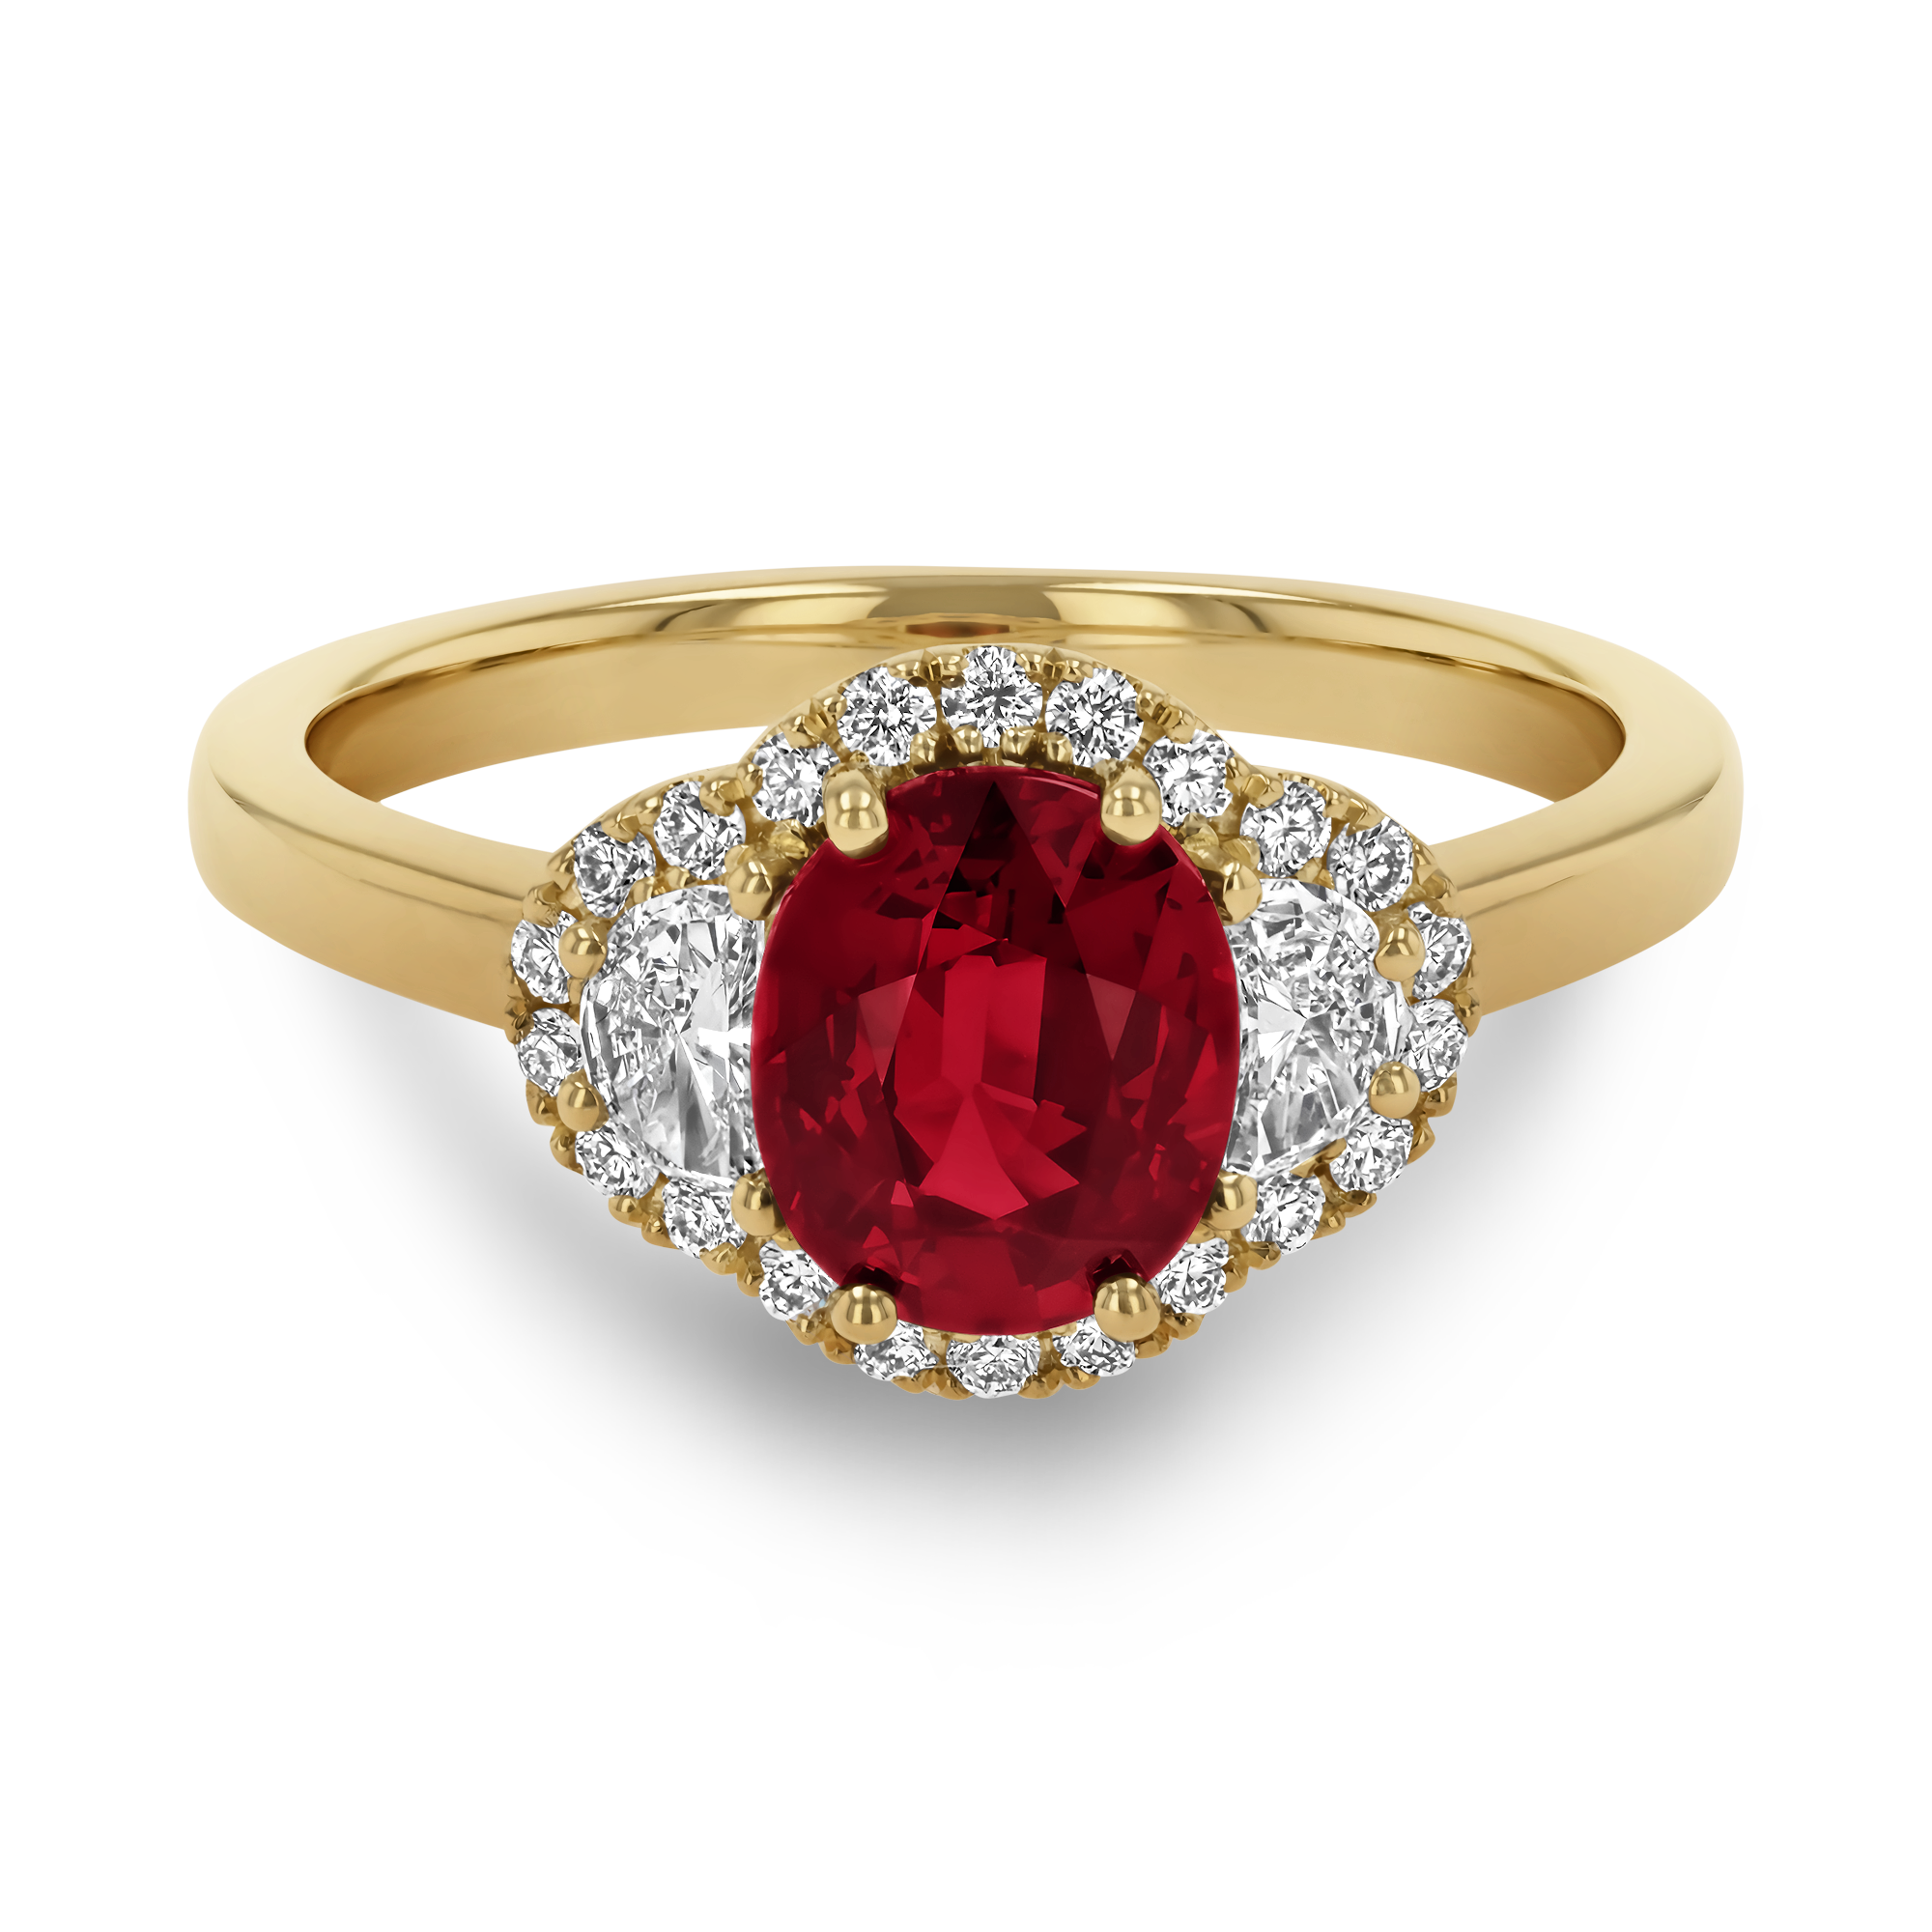 Mozambique 1.41ct Vivid Red Ruby and Diamond Cluster Ring Oval Cut, Rubover Set_2